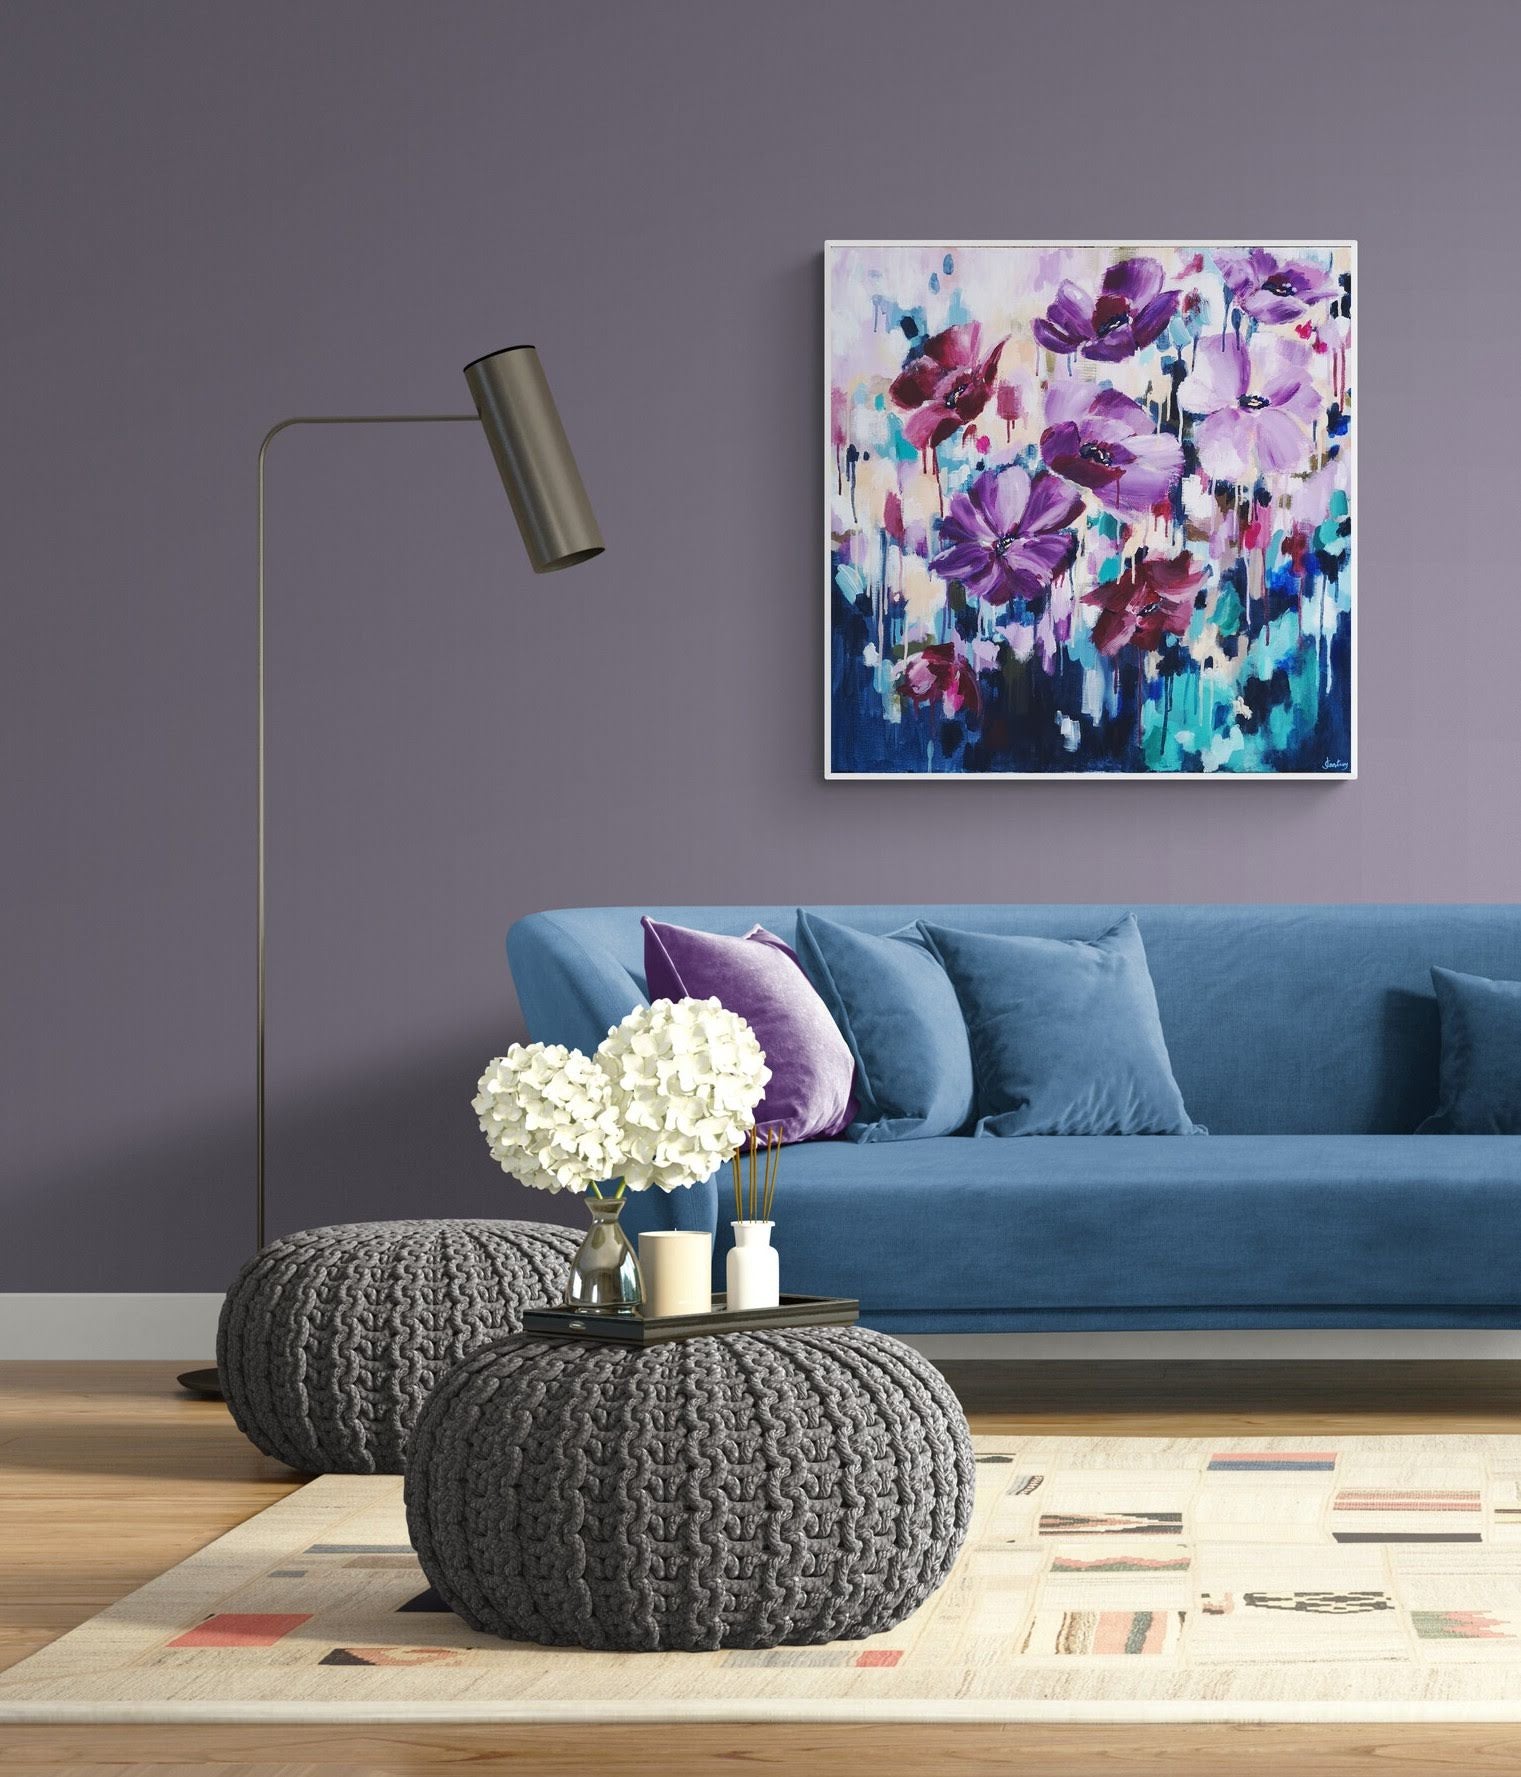 Original Large Abstract Floral Canvas painting, contemporary peach, purple, navy, maroon and teal in cosy living room, blue sofa